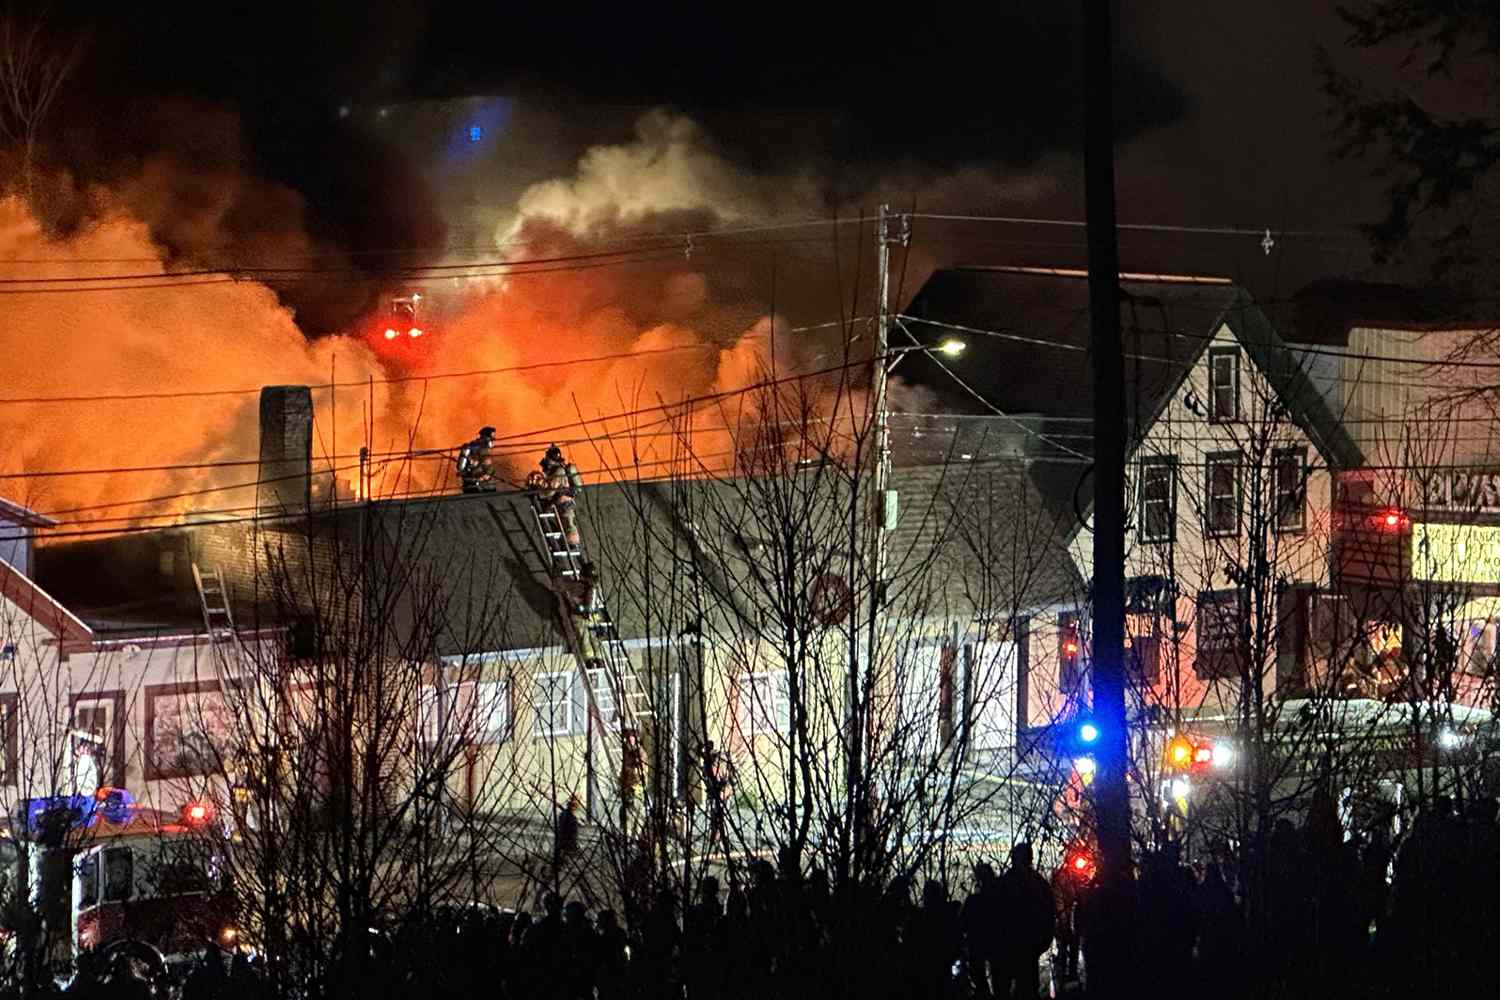 Hundreds Evacuated from New Hampshire Theater amid Devastating Fire [Video]